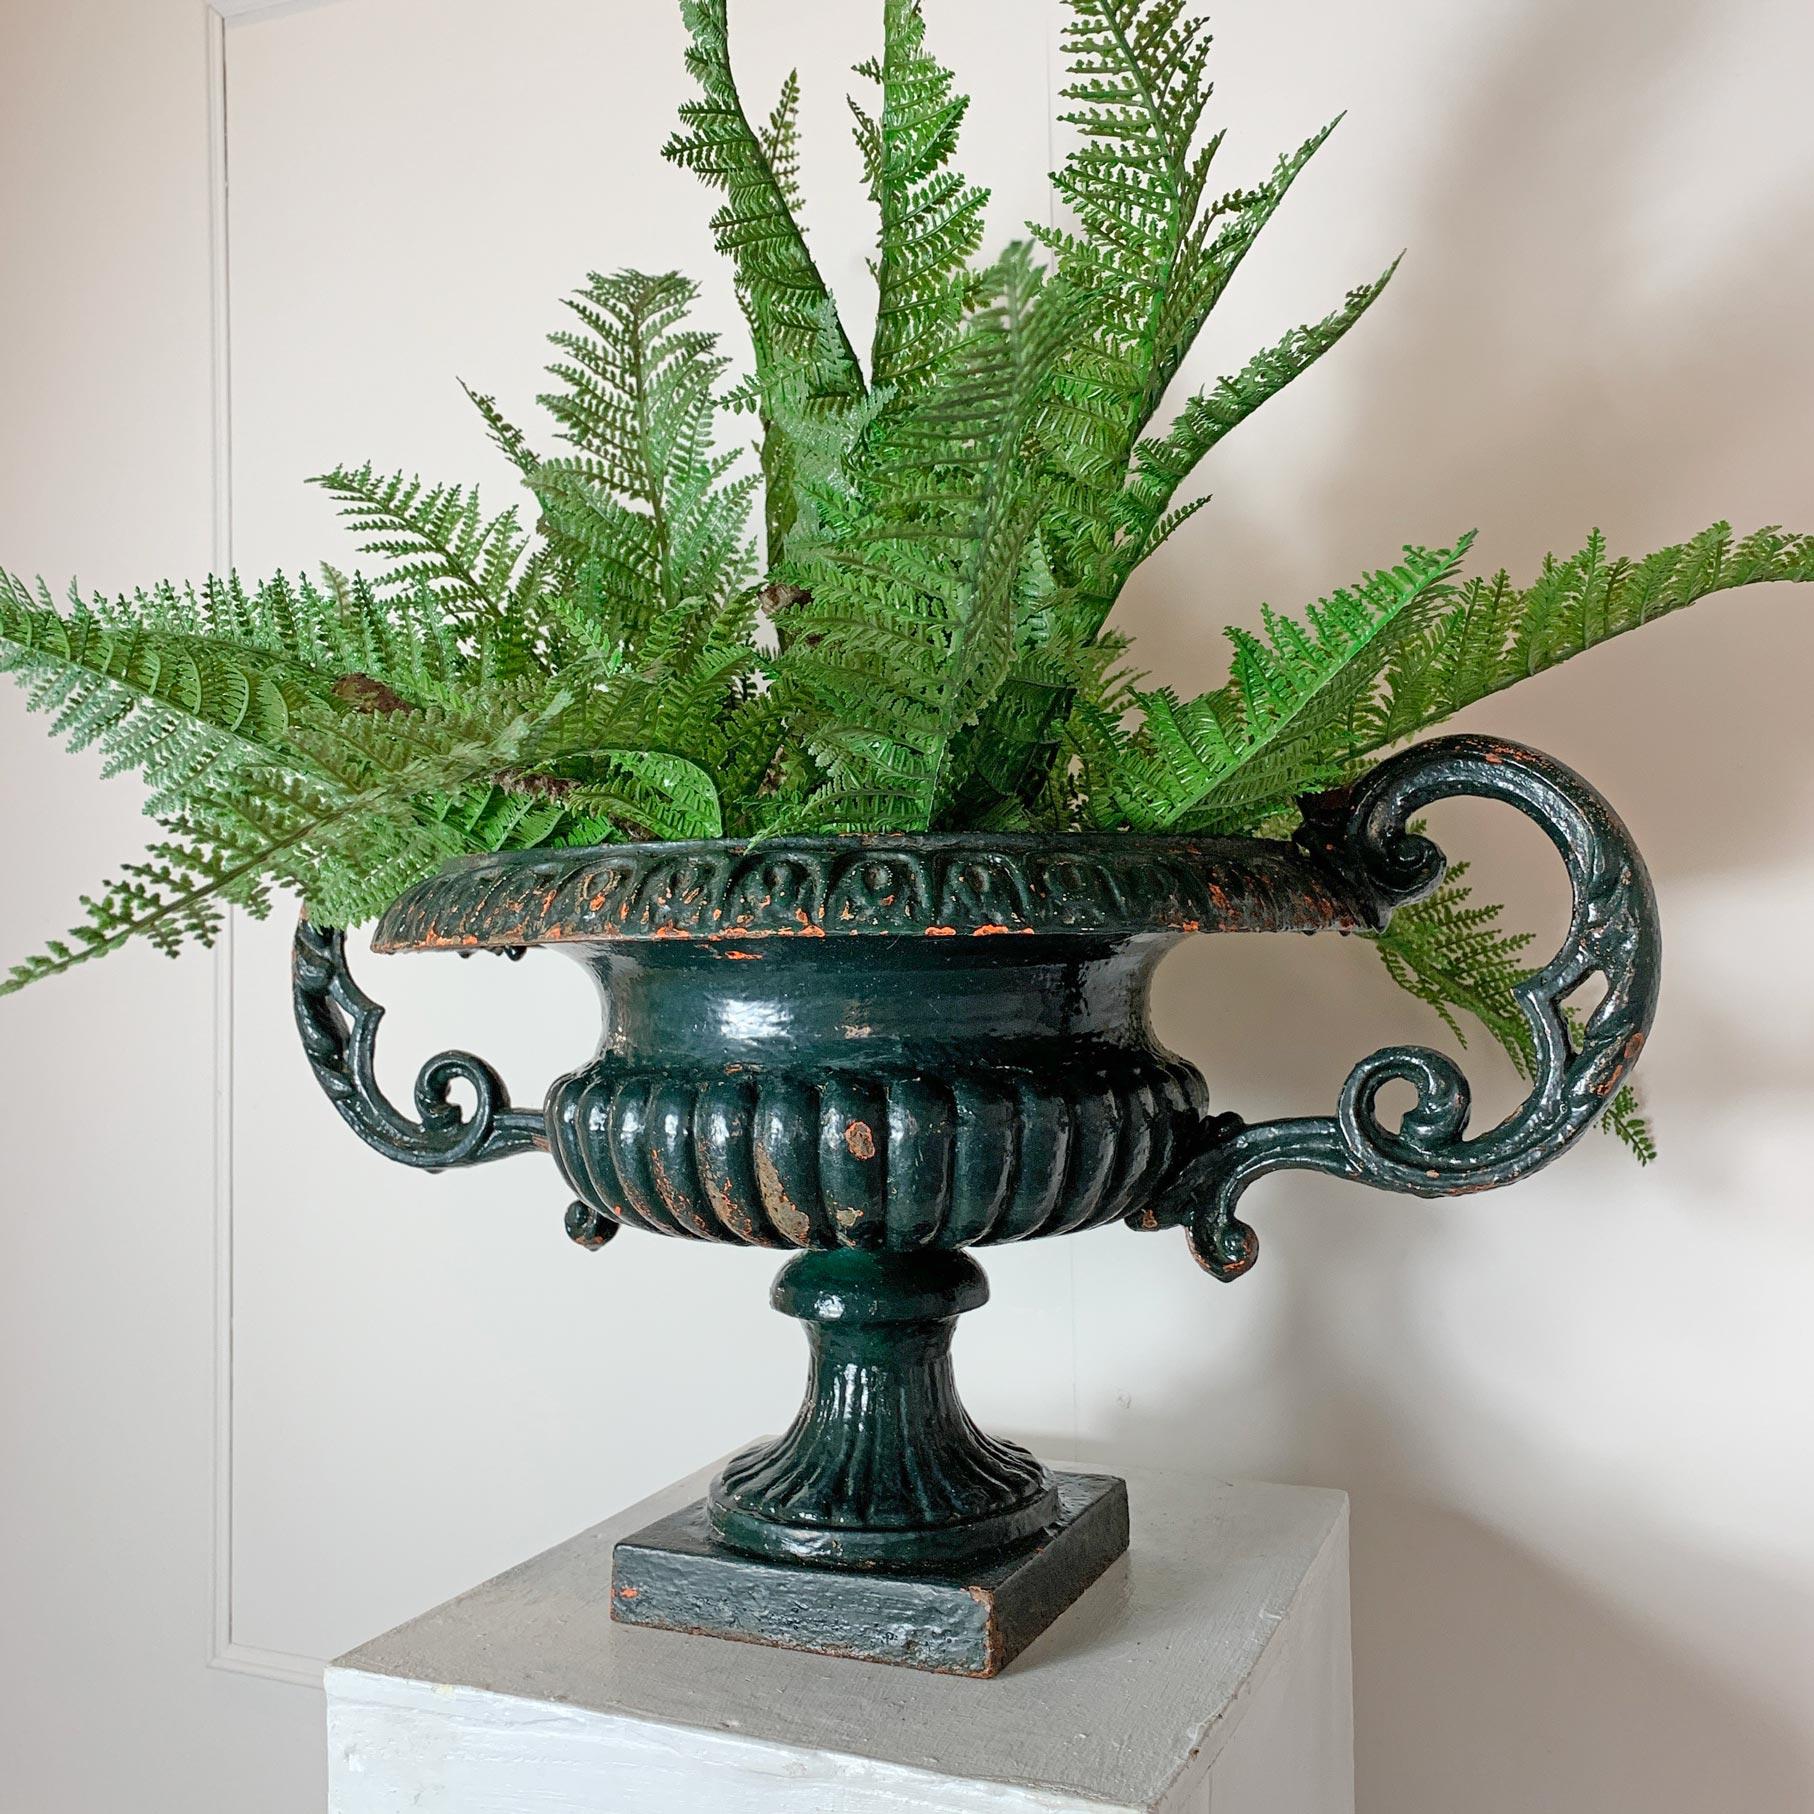 19th century French cast iron urn with decorative twin handles
Bottle green with orangey colored undertones, stunning shape,

58cm width, 39cm depth, 32cm height.